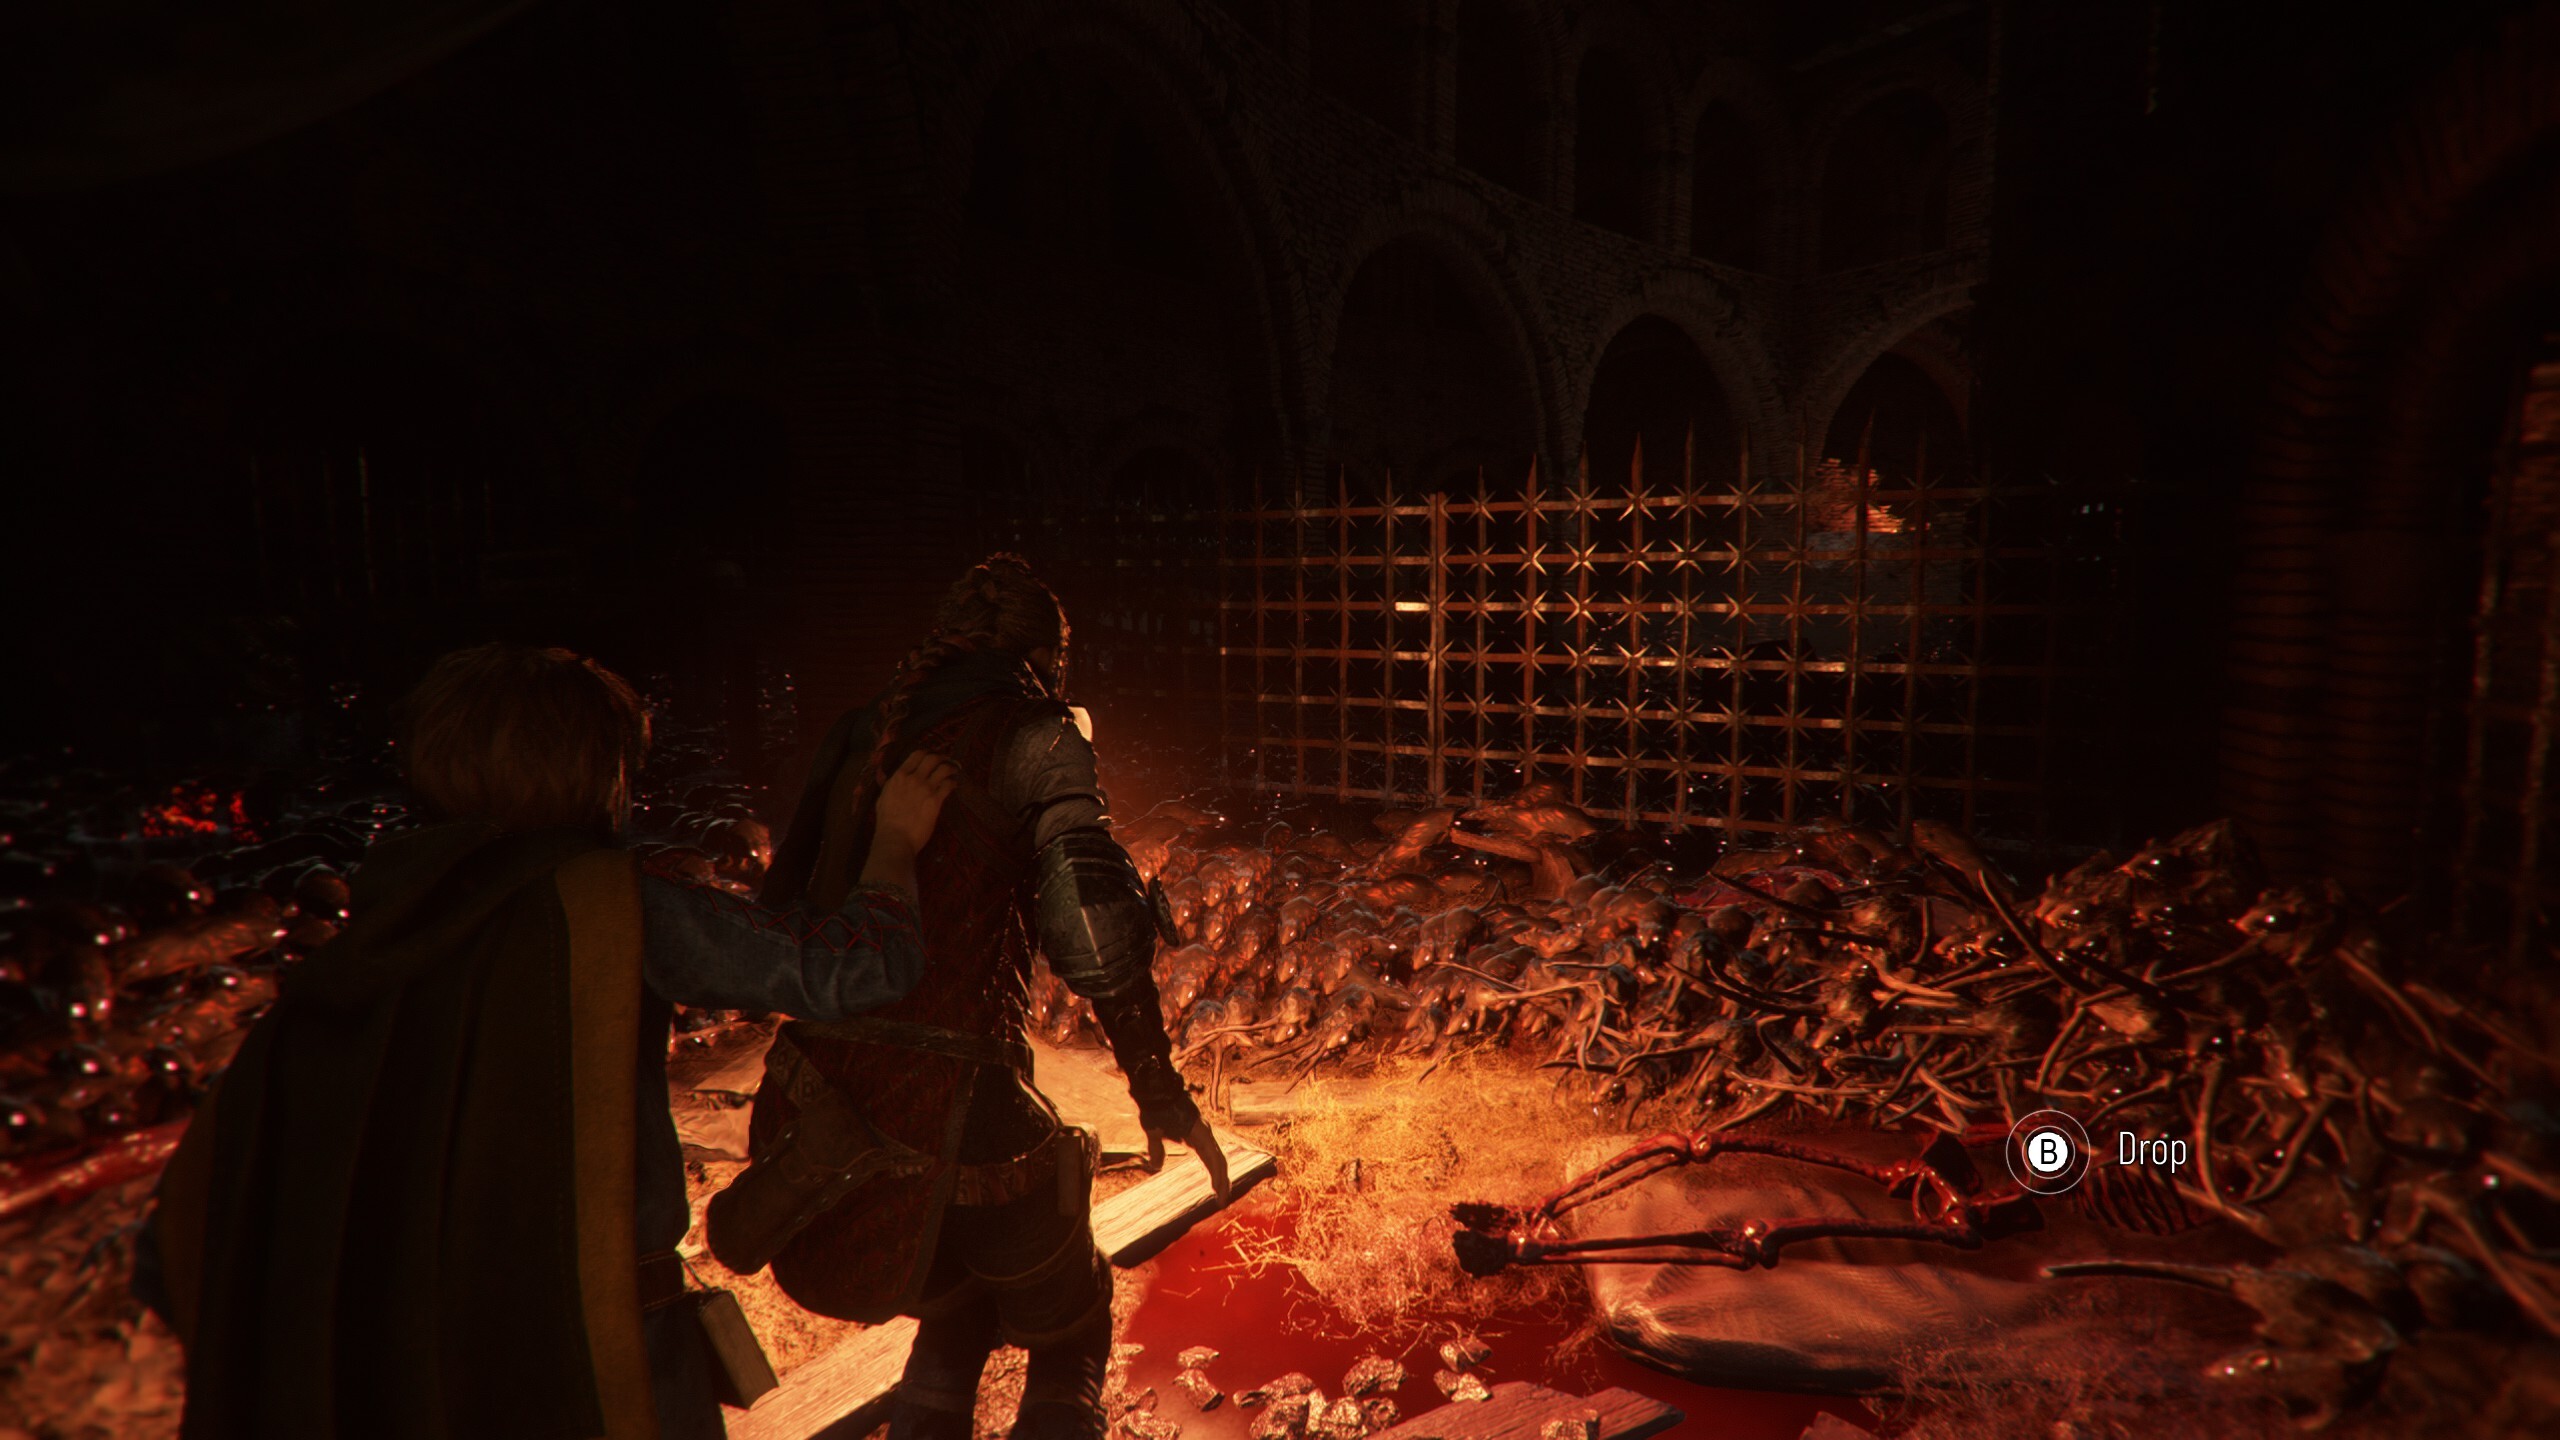 A Plague Tale: Requiem has dialled up the rat horror, but shows restraint  in its approach to violence